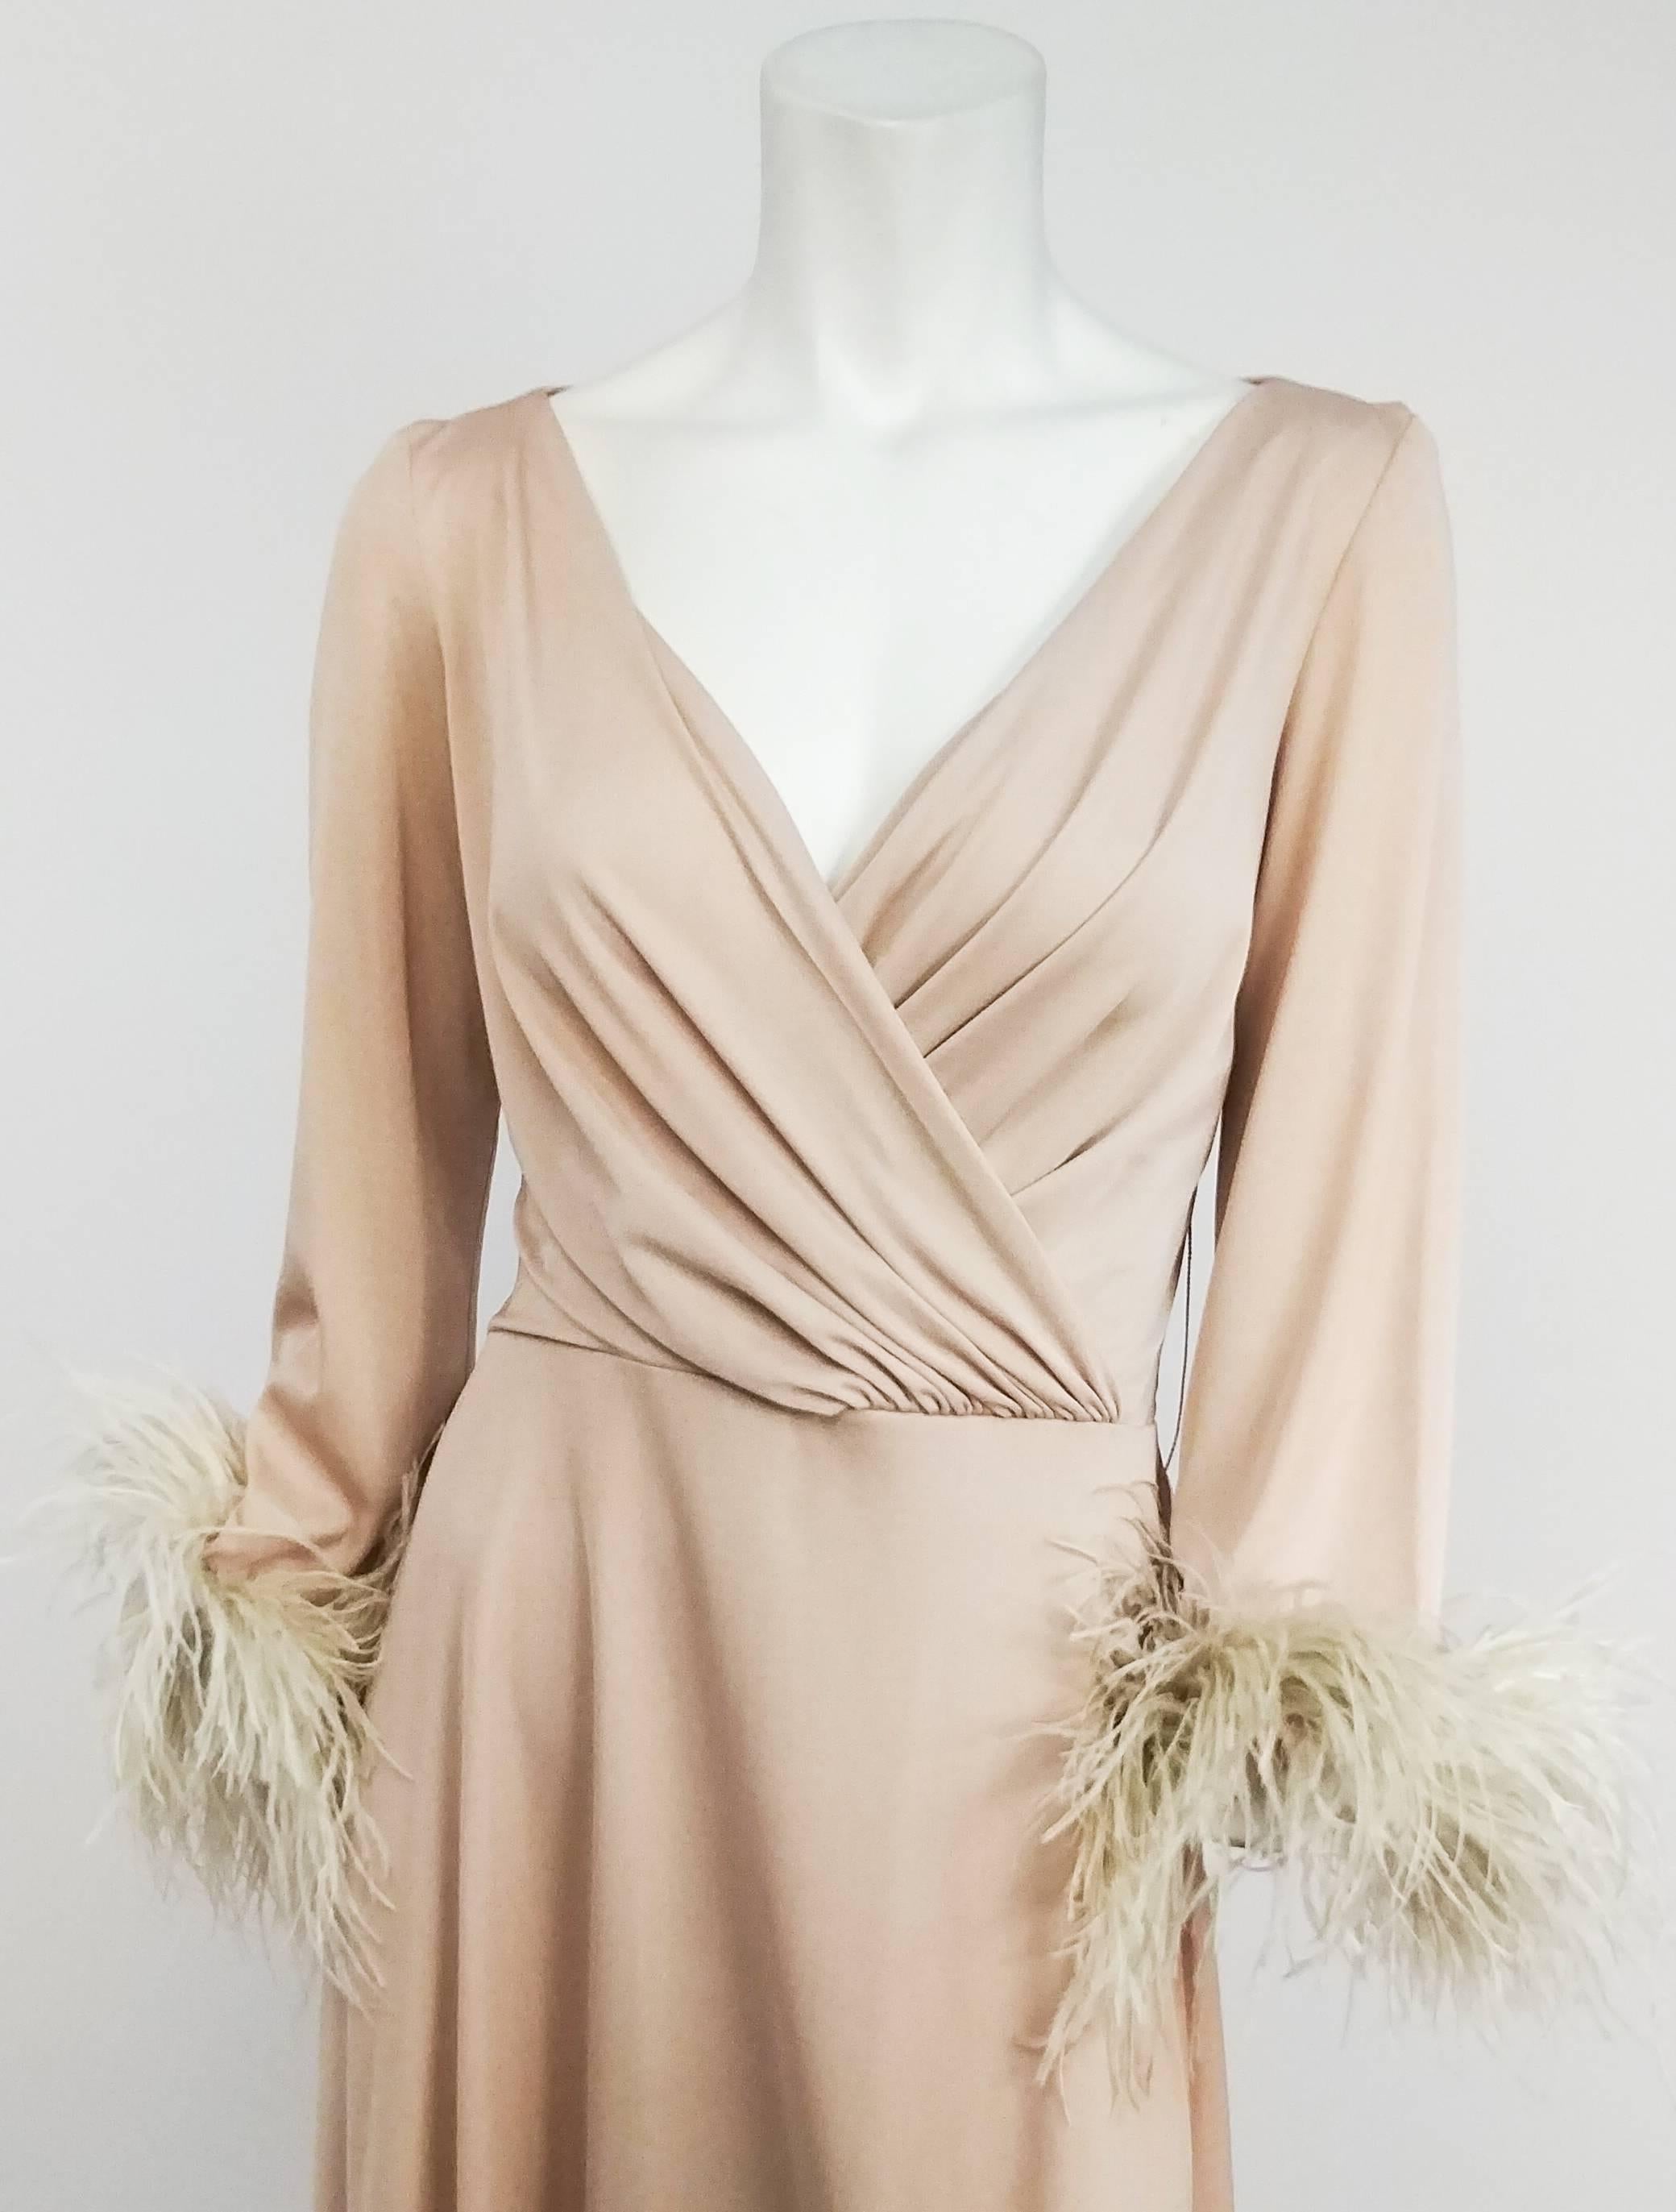 1970s Lilli Diamond Nude Dress with Feather Trim. Stretch jersey nude dress with draped bodice and feather trimmed sleeves. Zips up back.